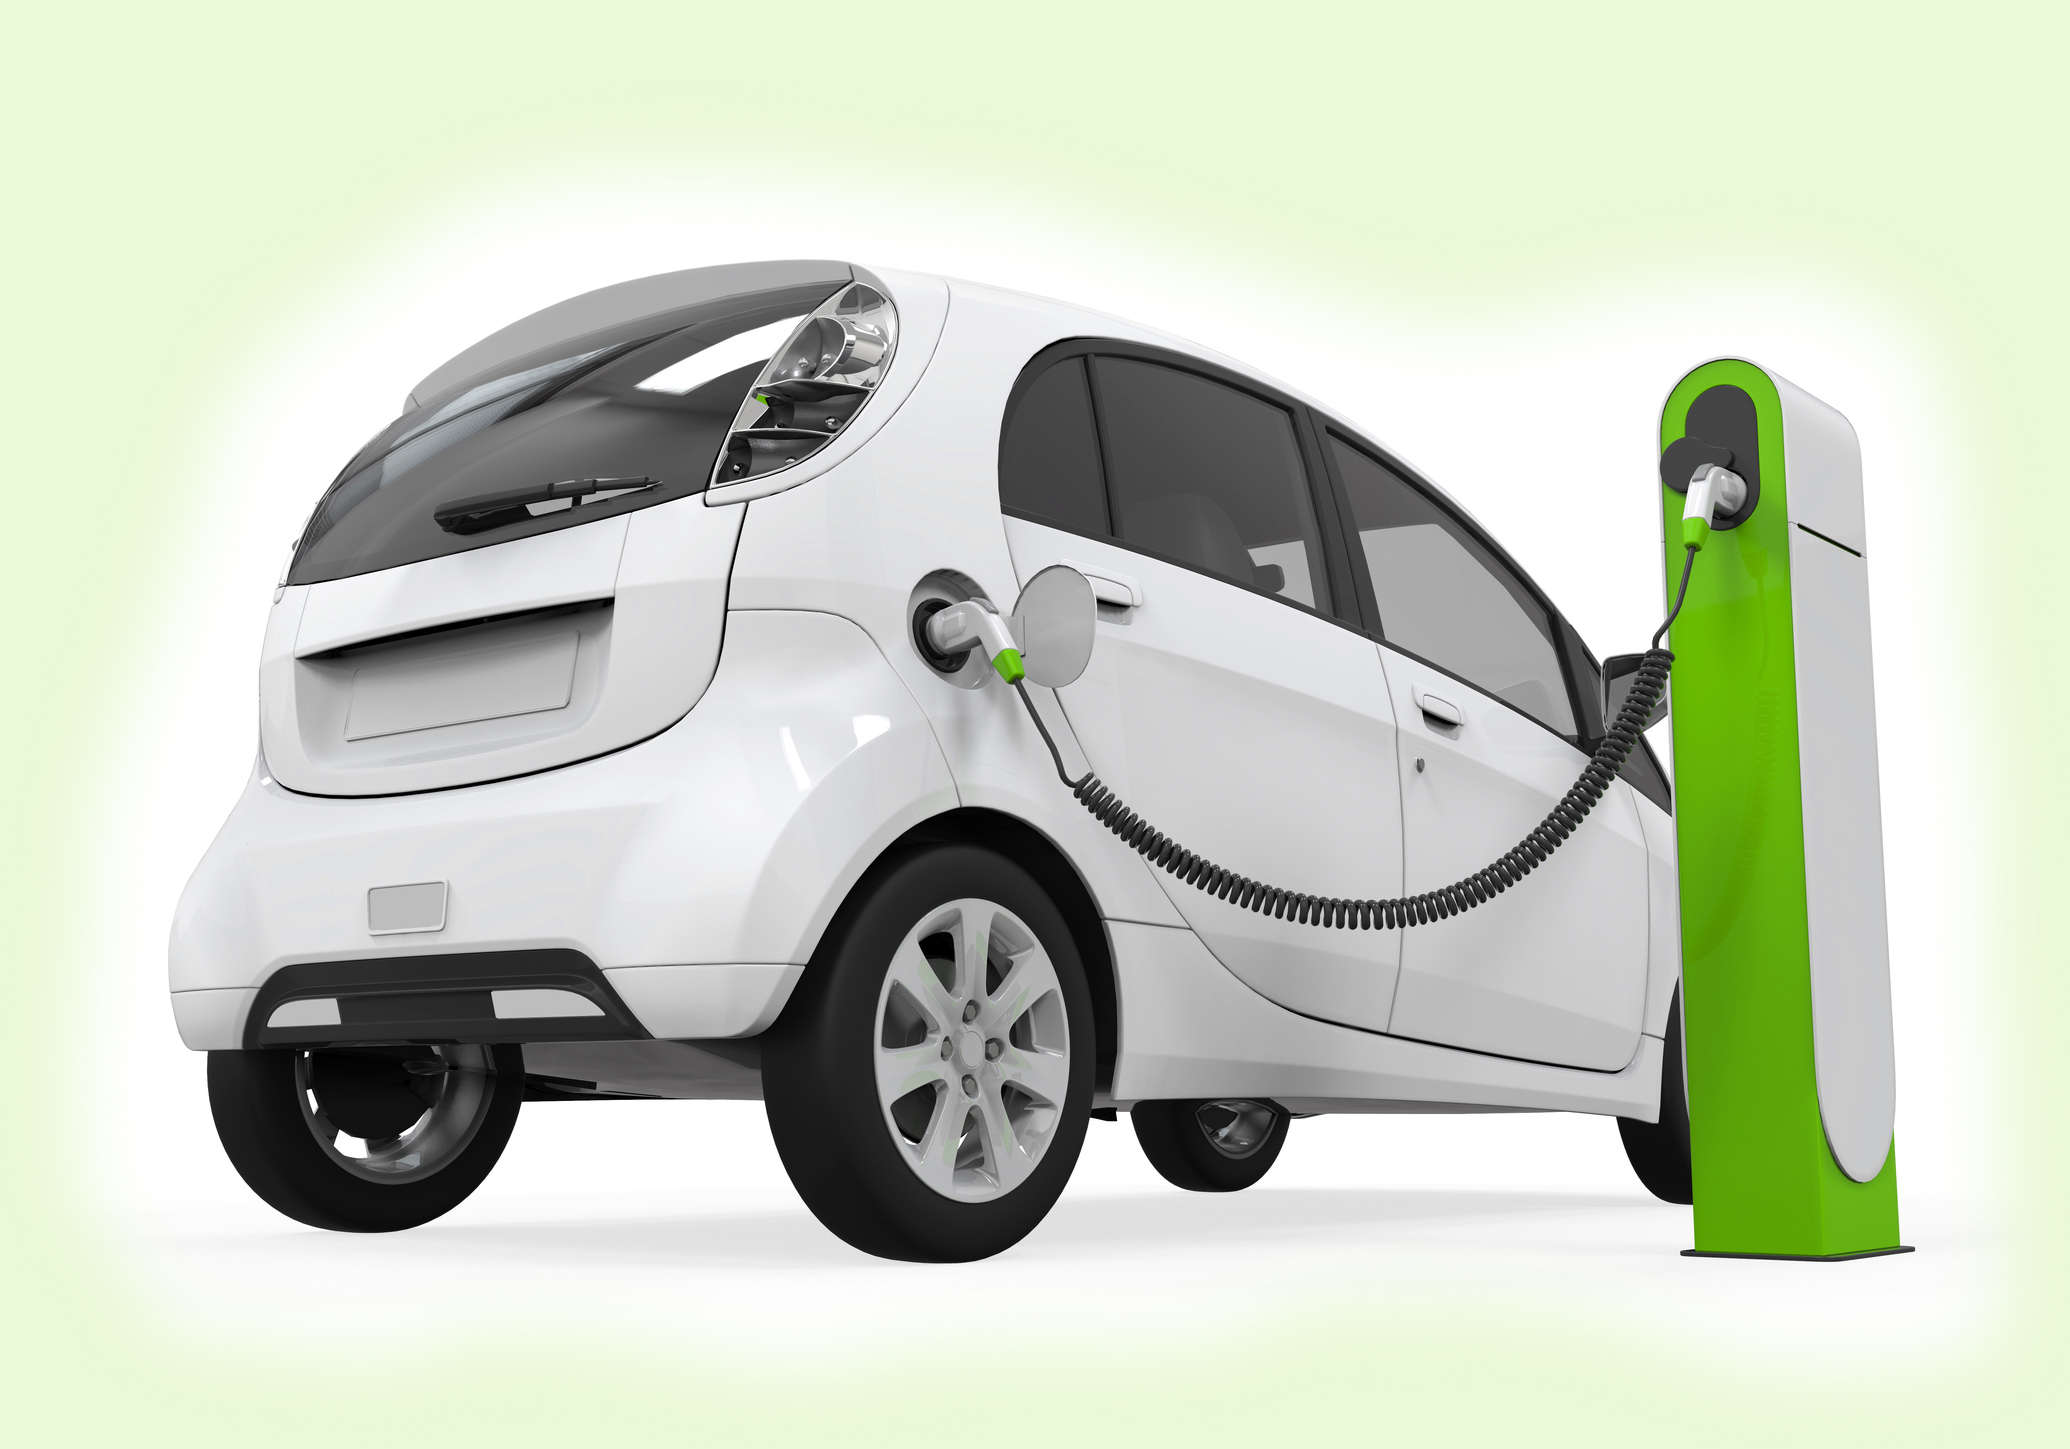 Electric vehicle technology has come of age. To curb air pollution